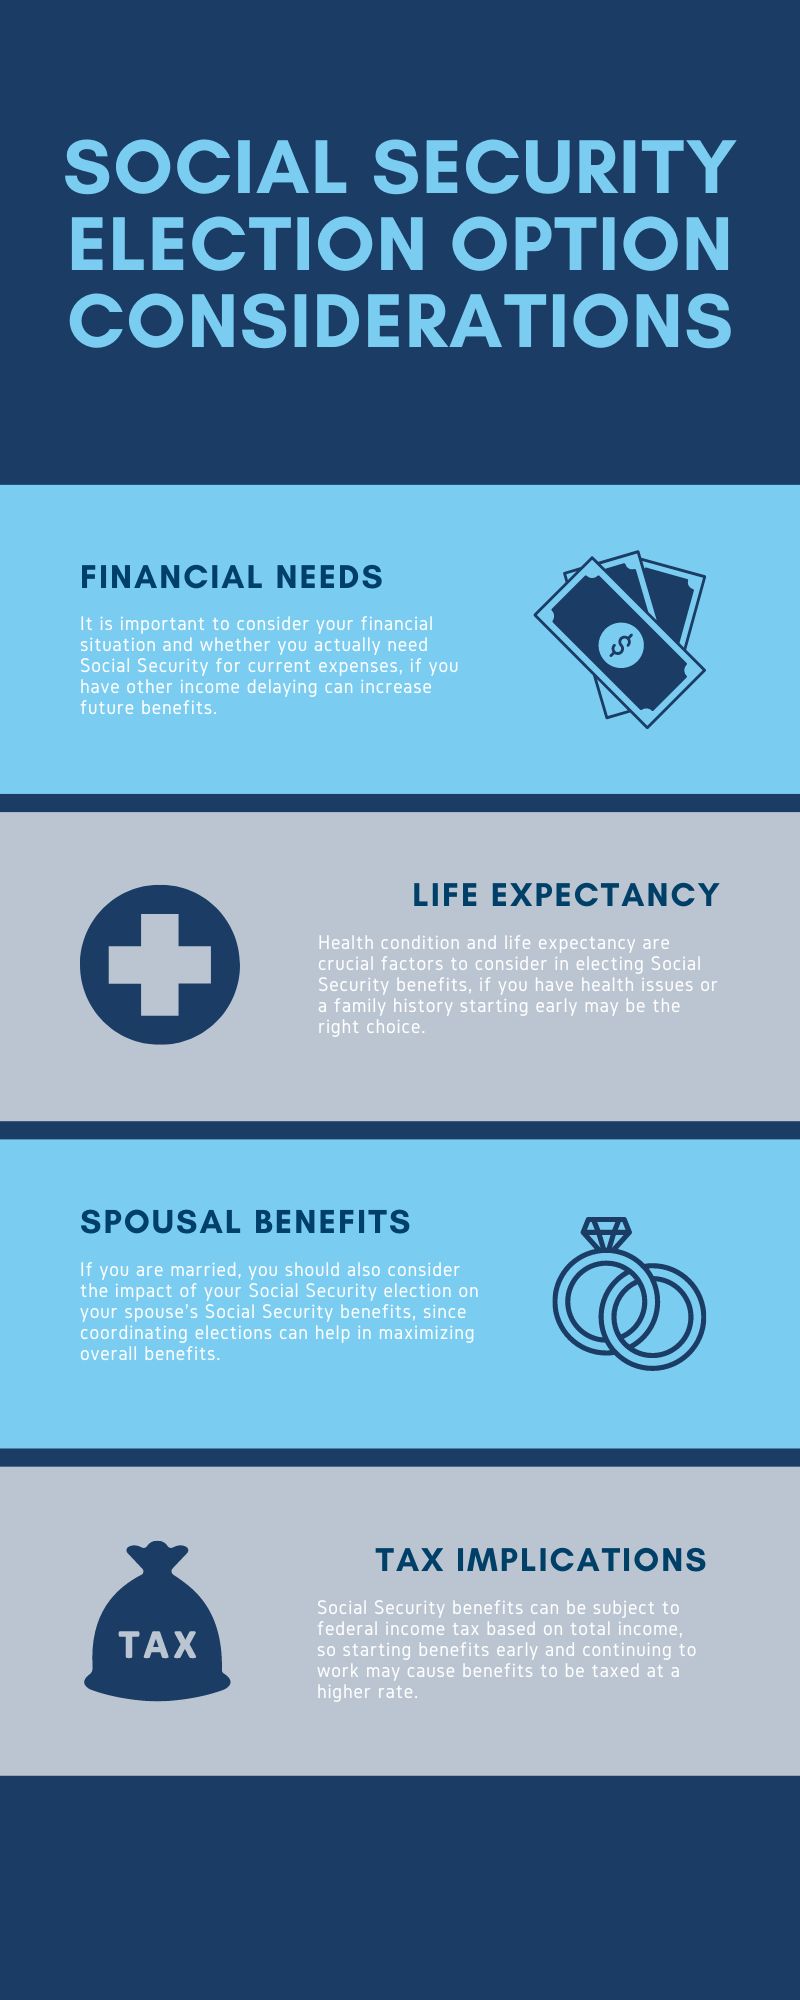 Social Security Election Option Considerations infographic